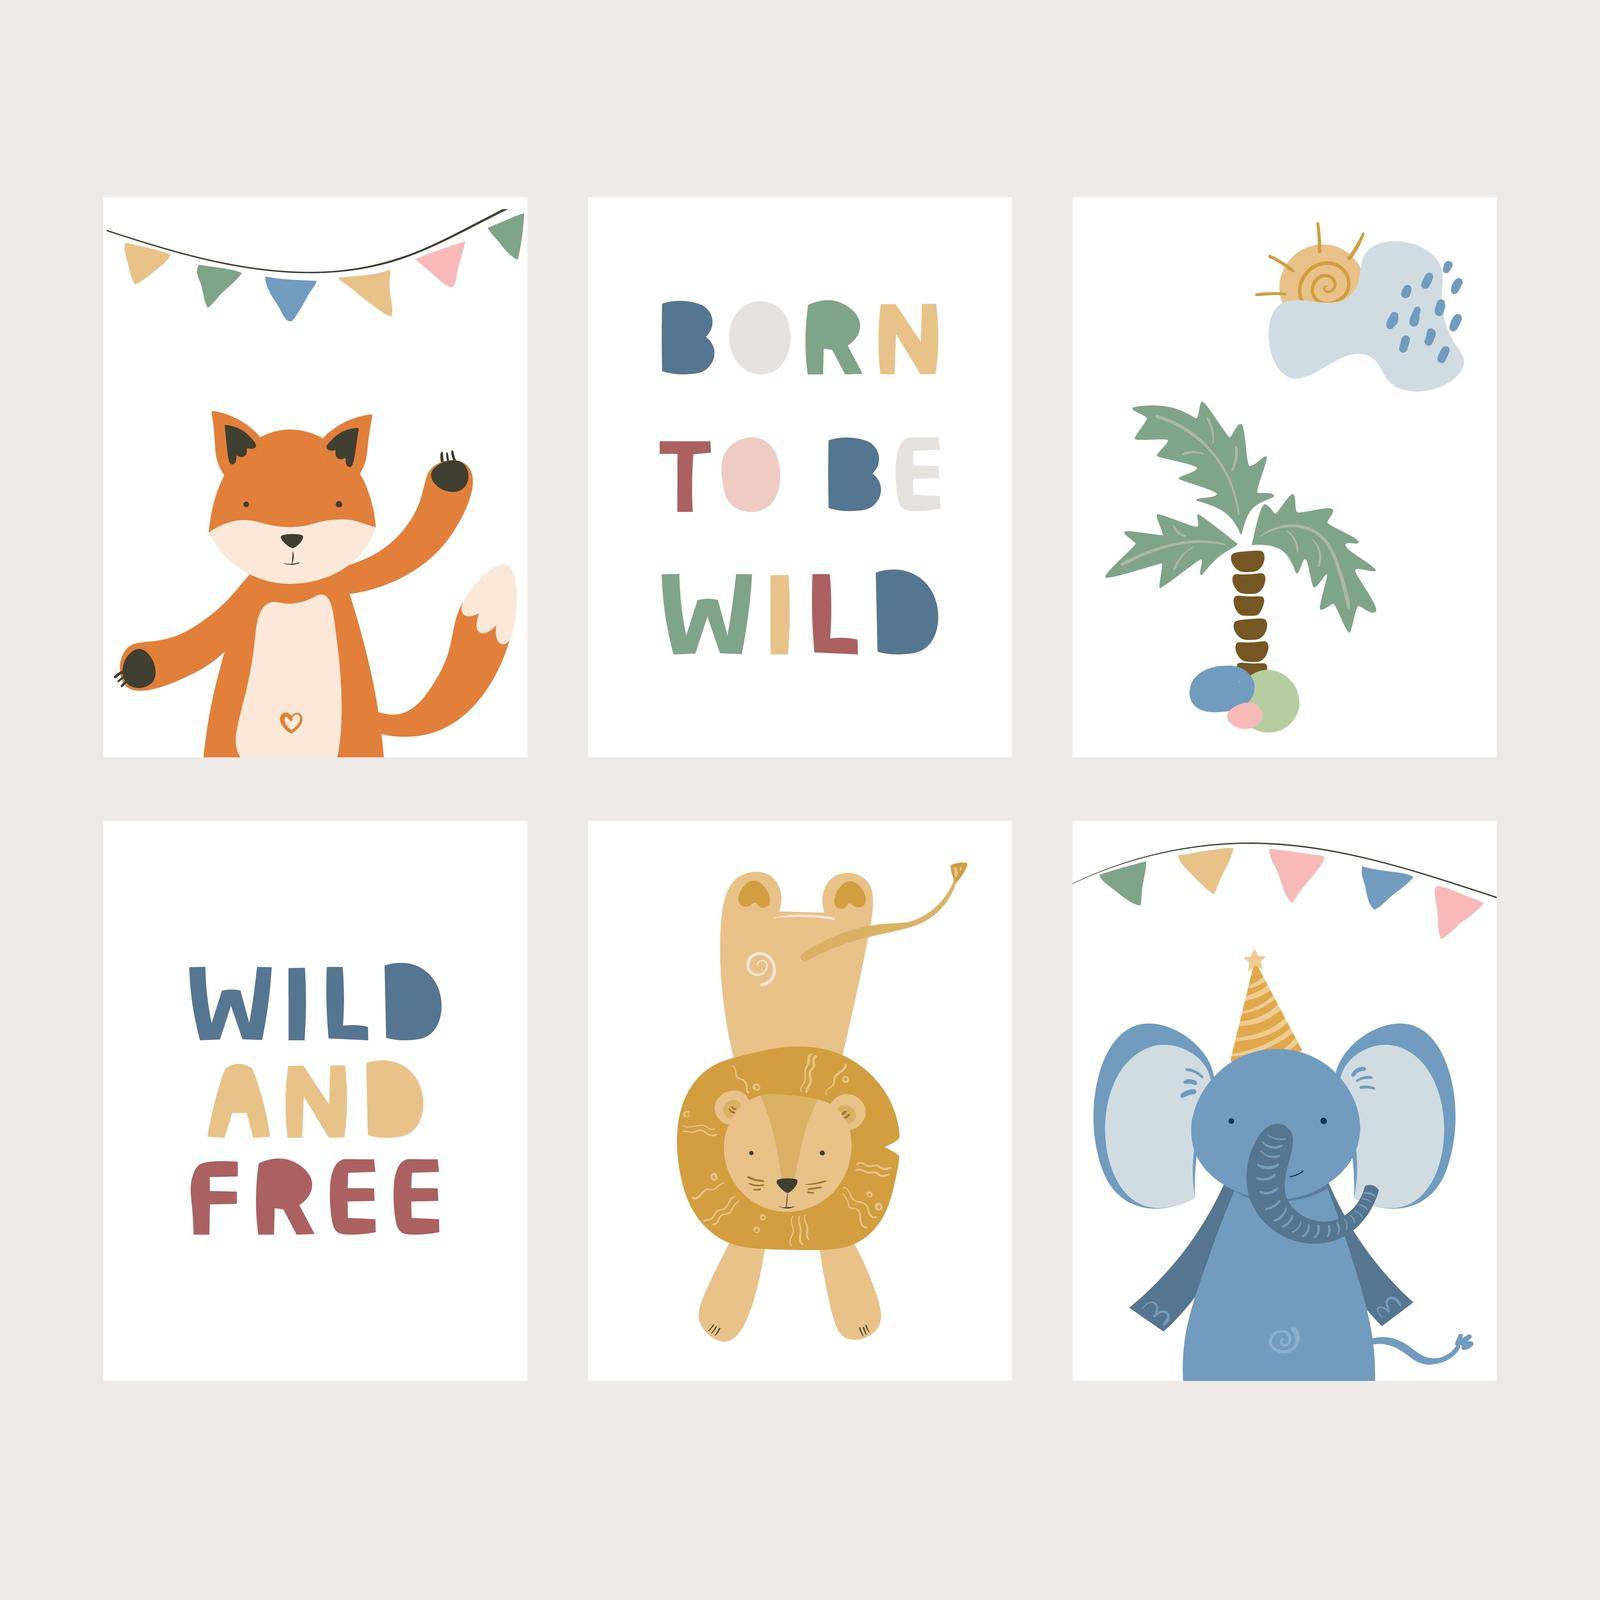 Cartoon cute animals baby card collections. Vector illustration. Elephant, lion and fox